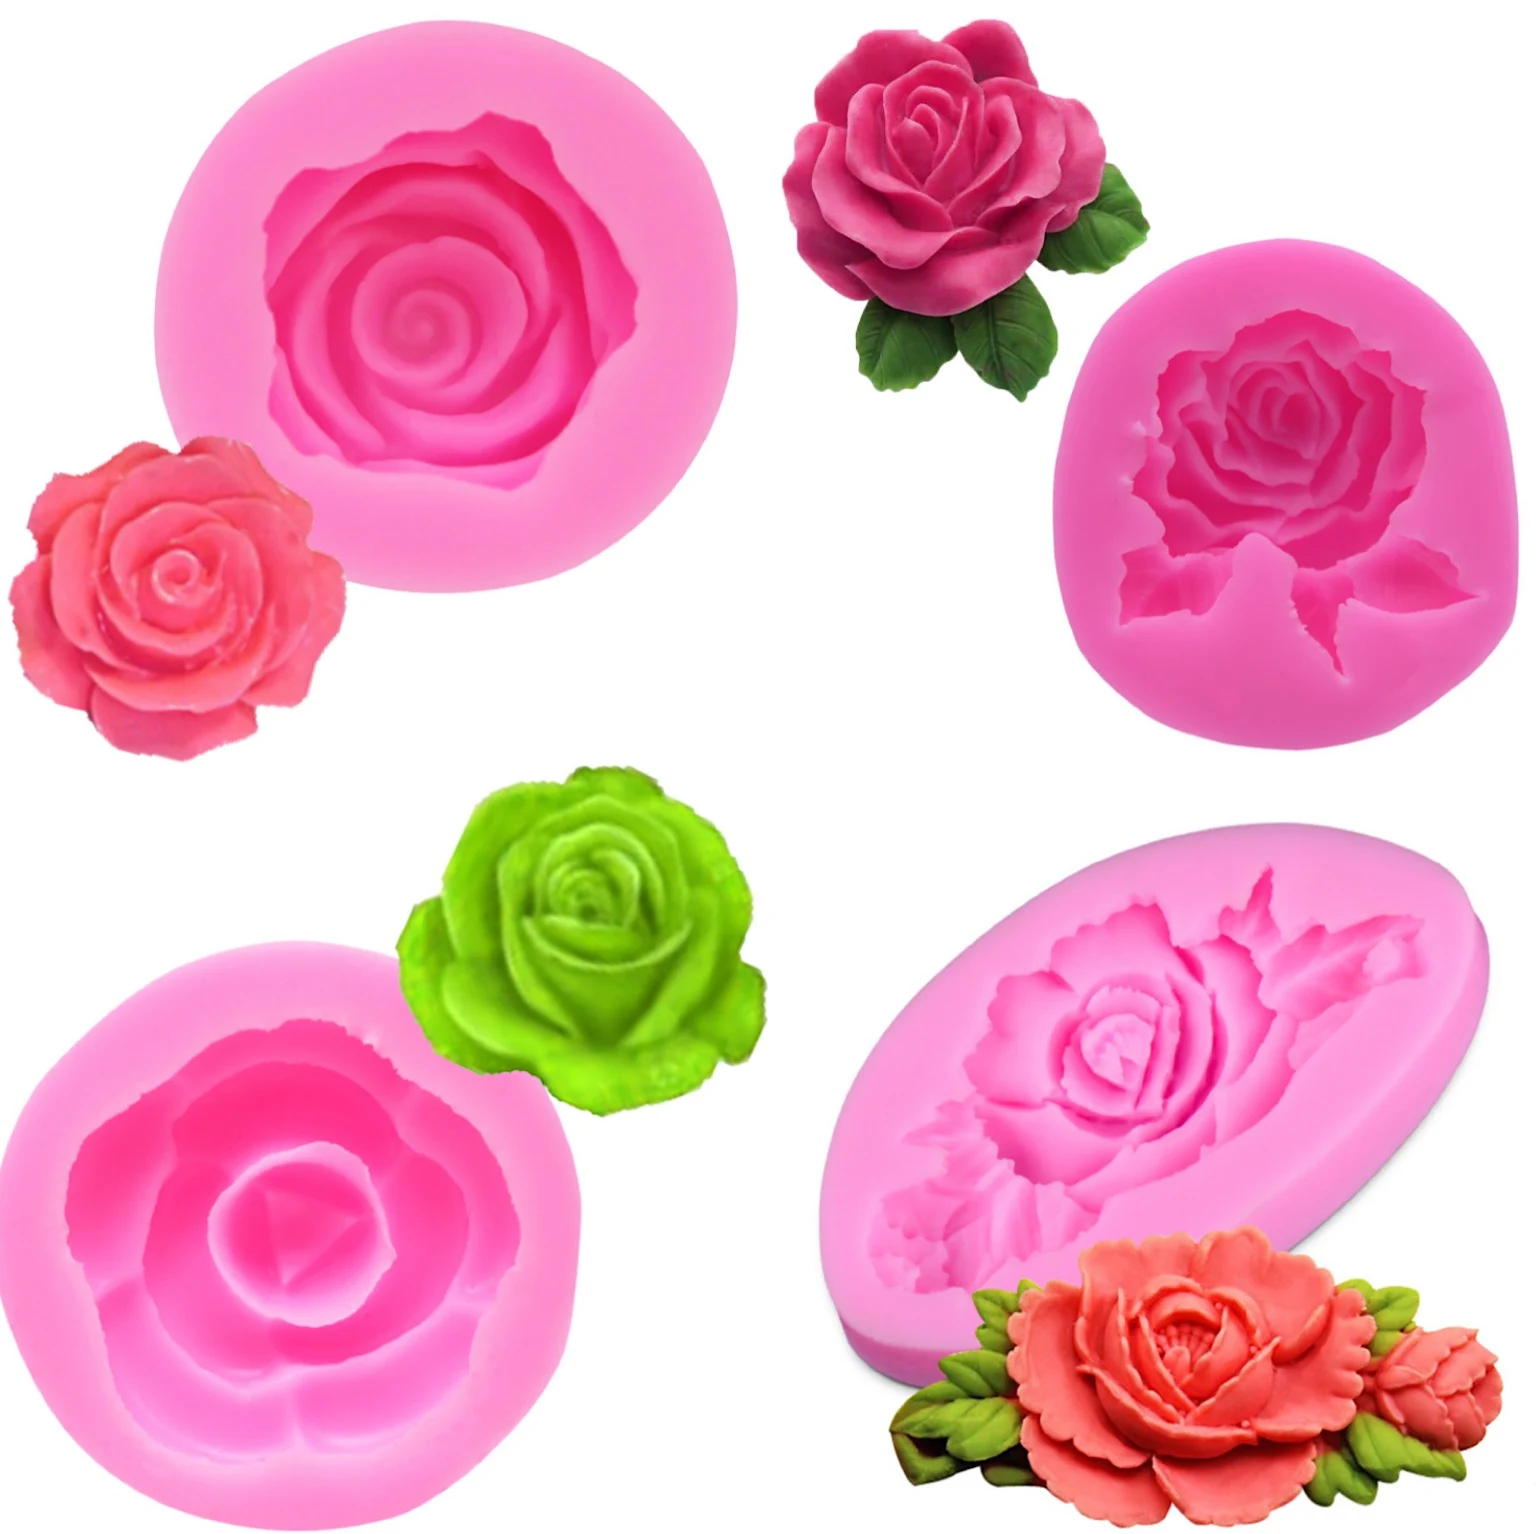 3D Rose Flower Silicone Fondant Mold Cake Decor Chocolate C2P2 SELL Mould S8J6 